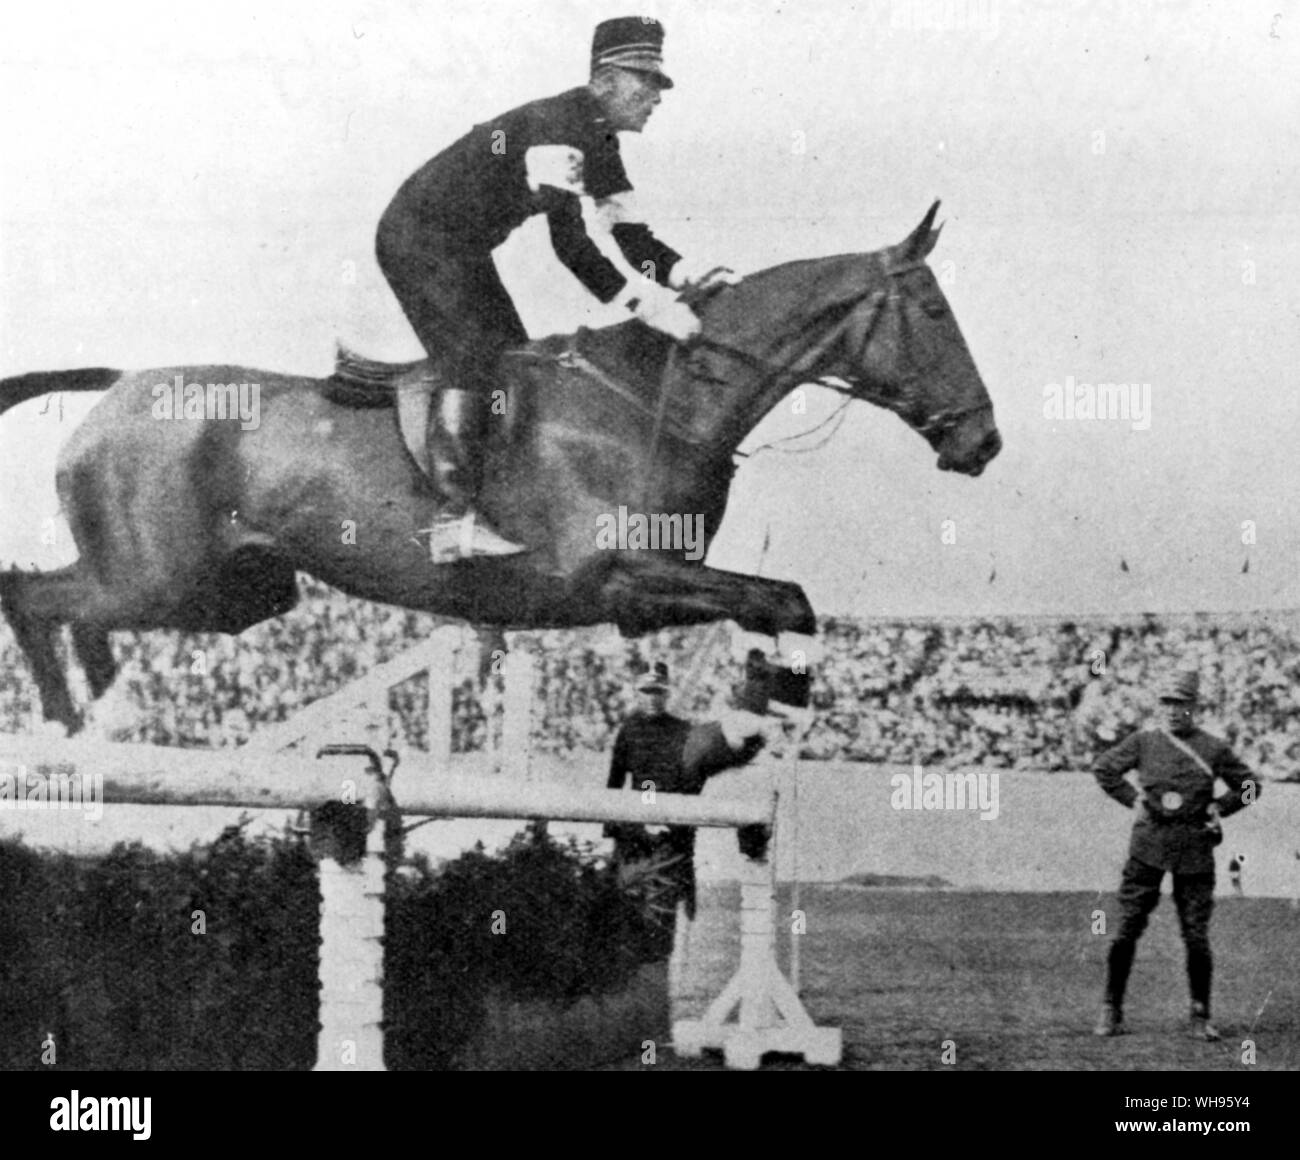 Competition for the equestrian championship show jumping competition C F Pahud De Mortanges (Holland) on Marcroix first indival and team Olympic Games Amsterdam 1928 Stock Photo